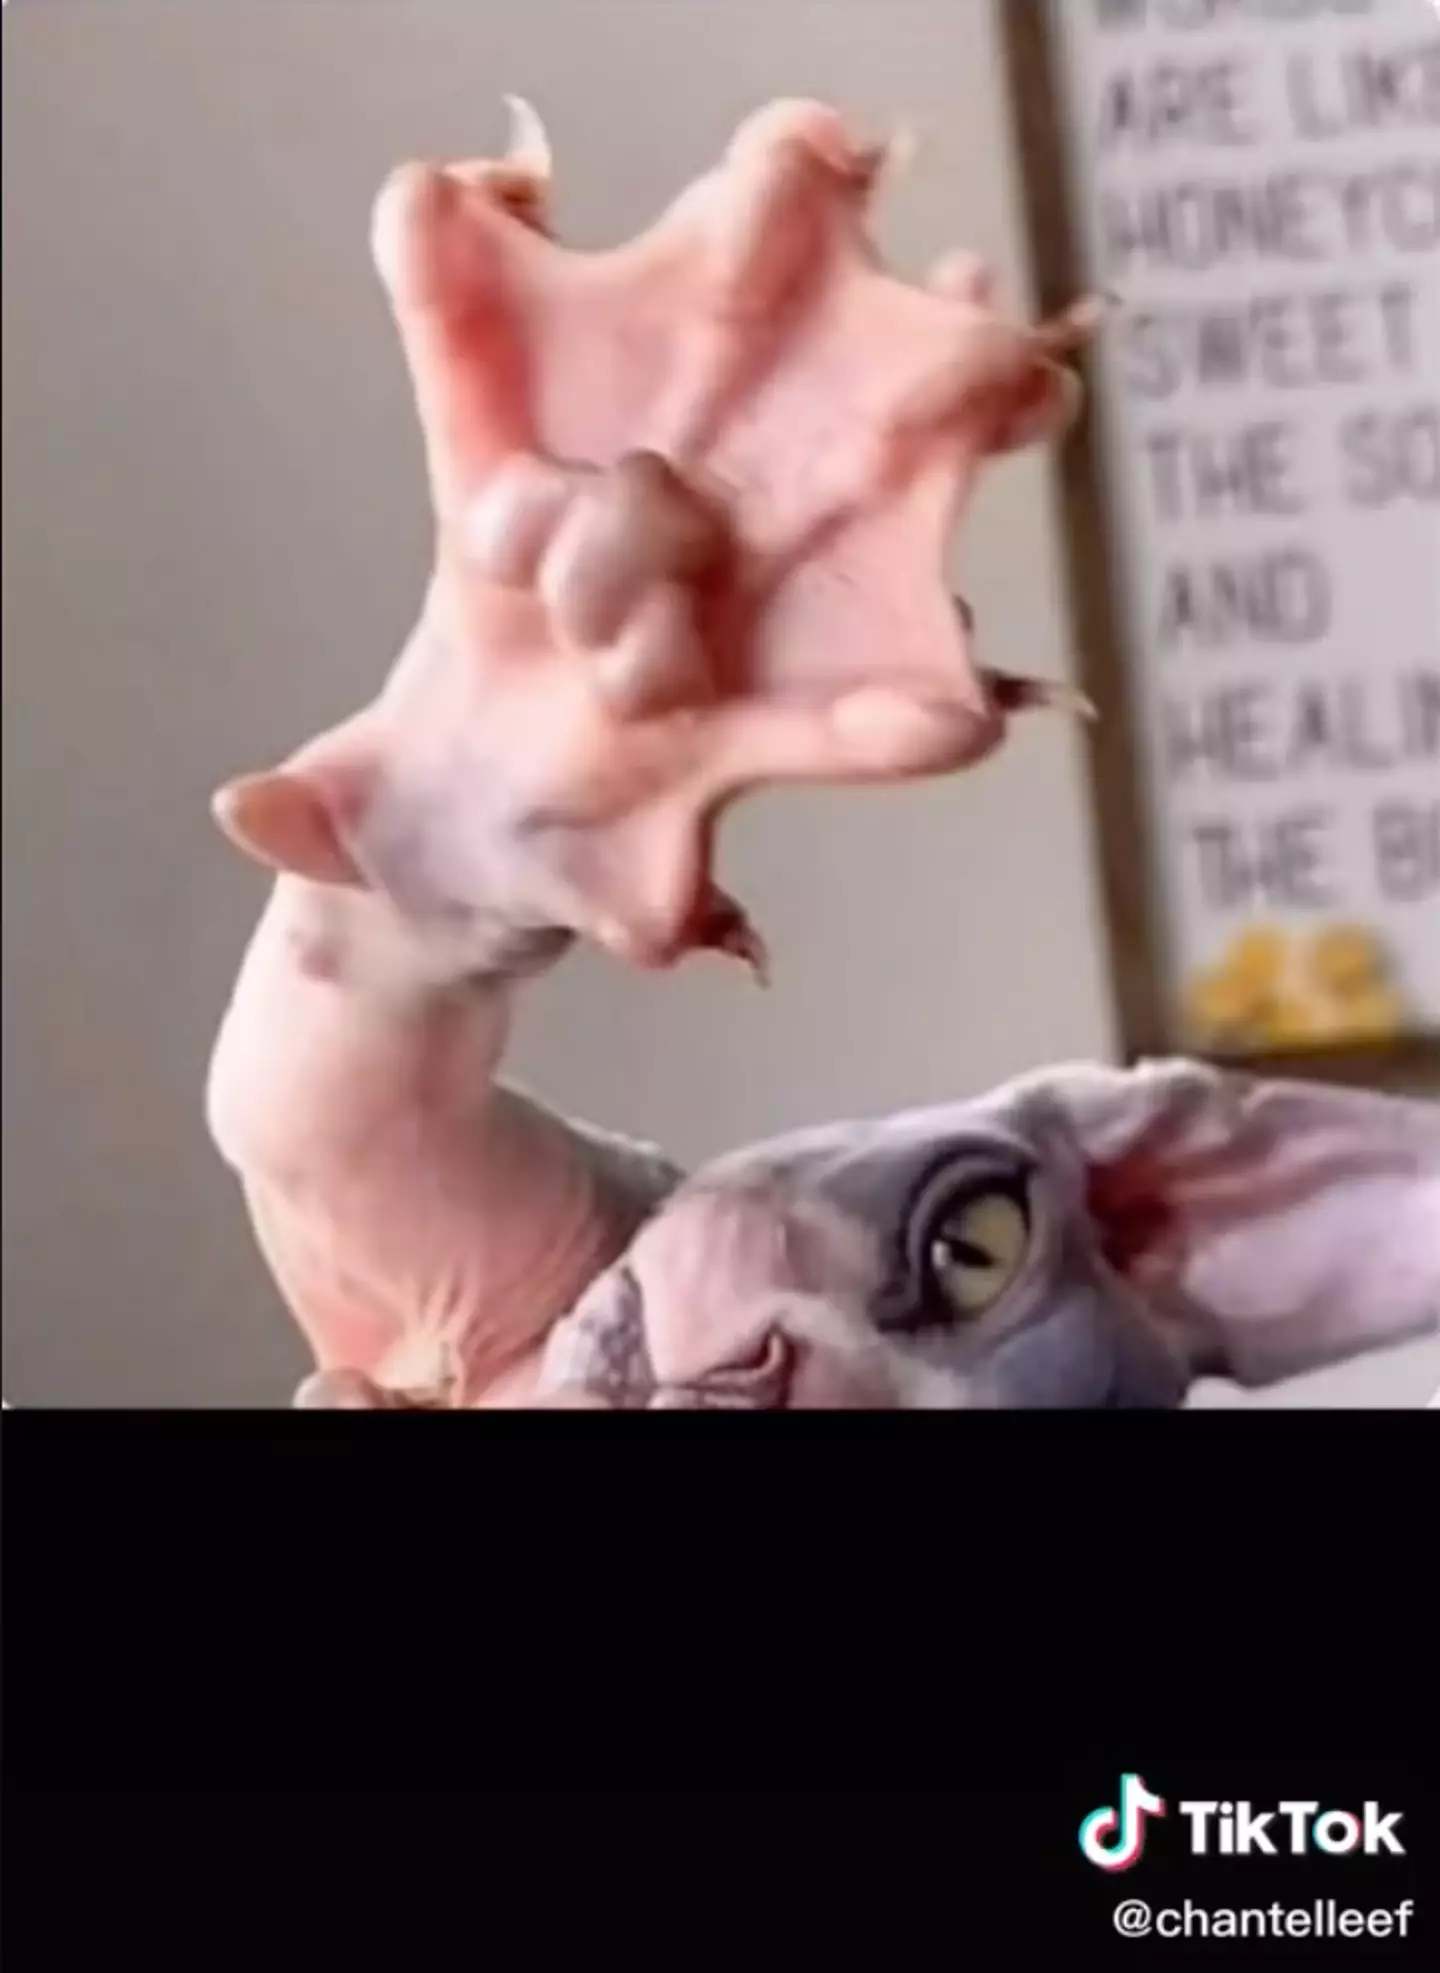 A TikTok user was left in shock after seeing a Sphynx cat's paw (